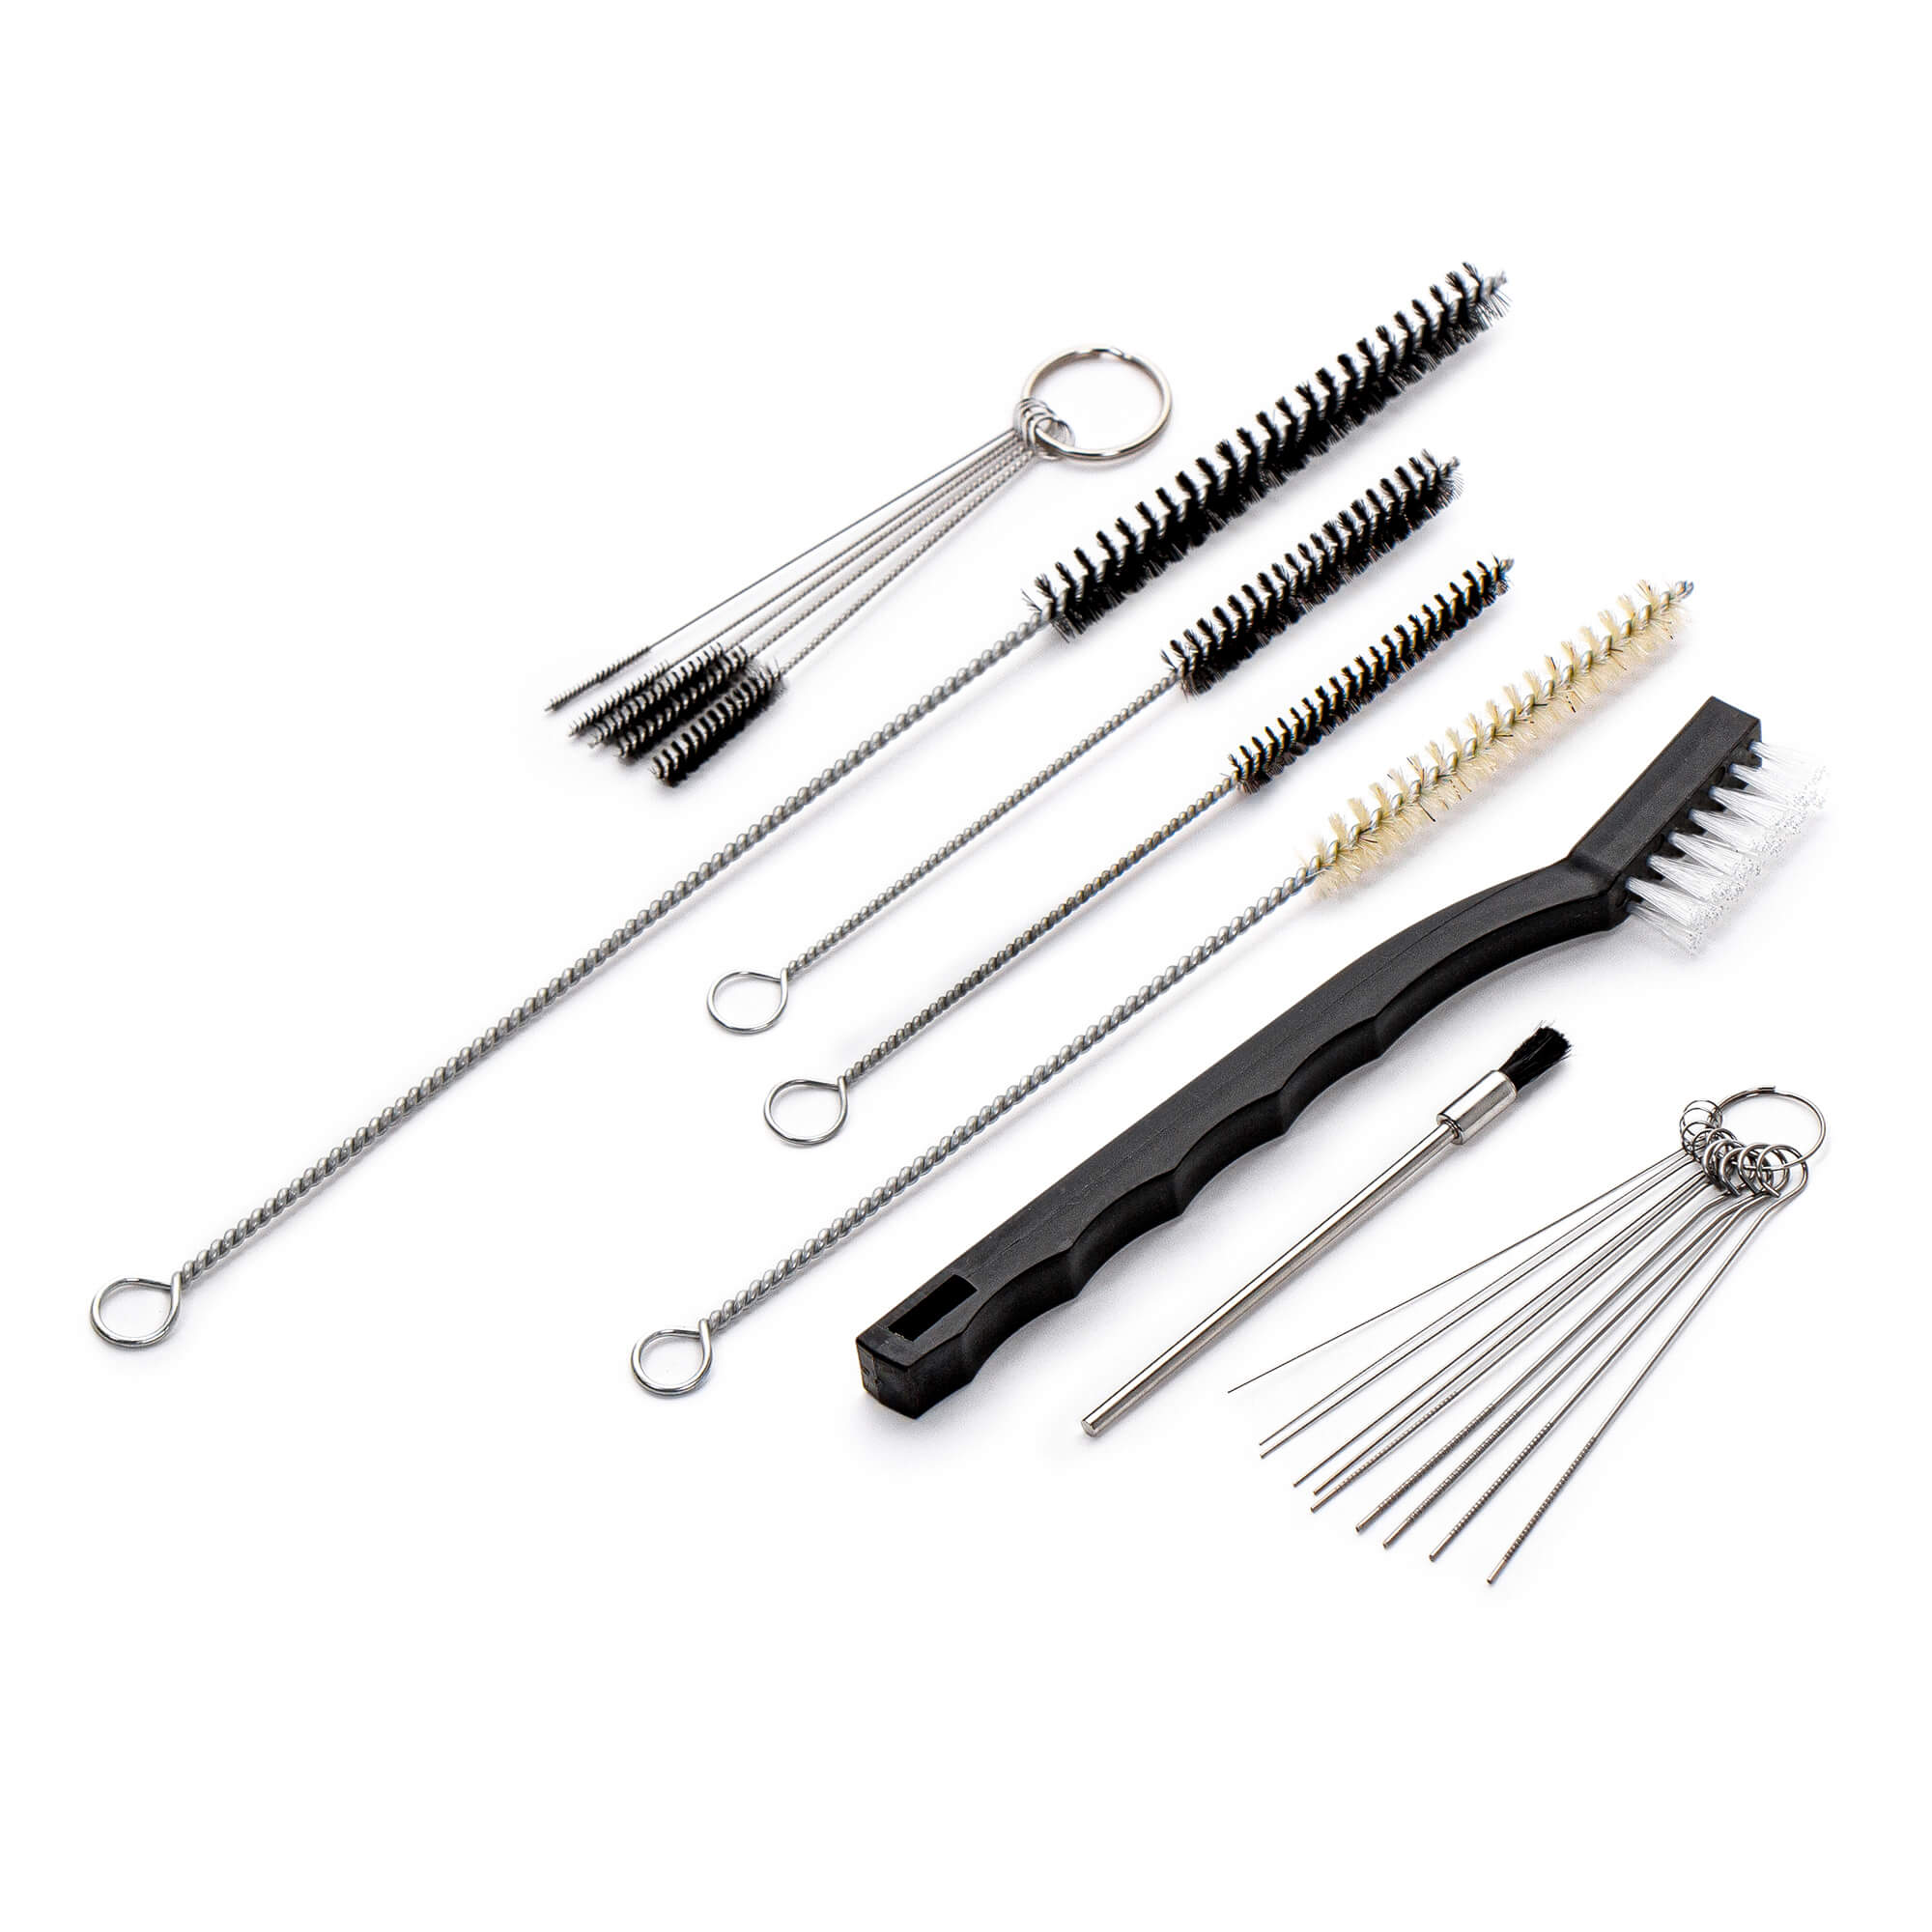 Airbrush Cleaning brush Set (6pcs) by Harder and Steenbeck